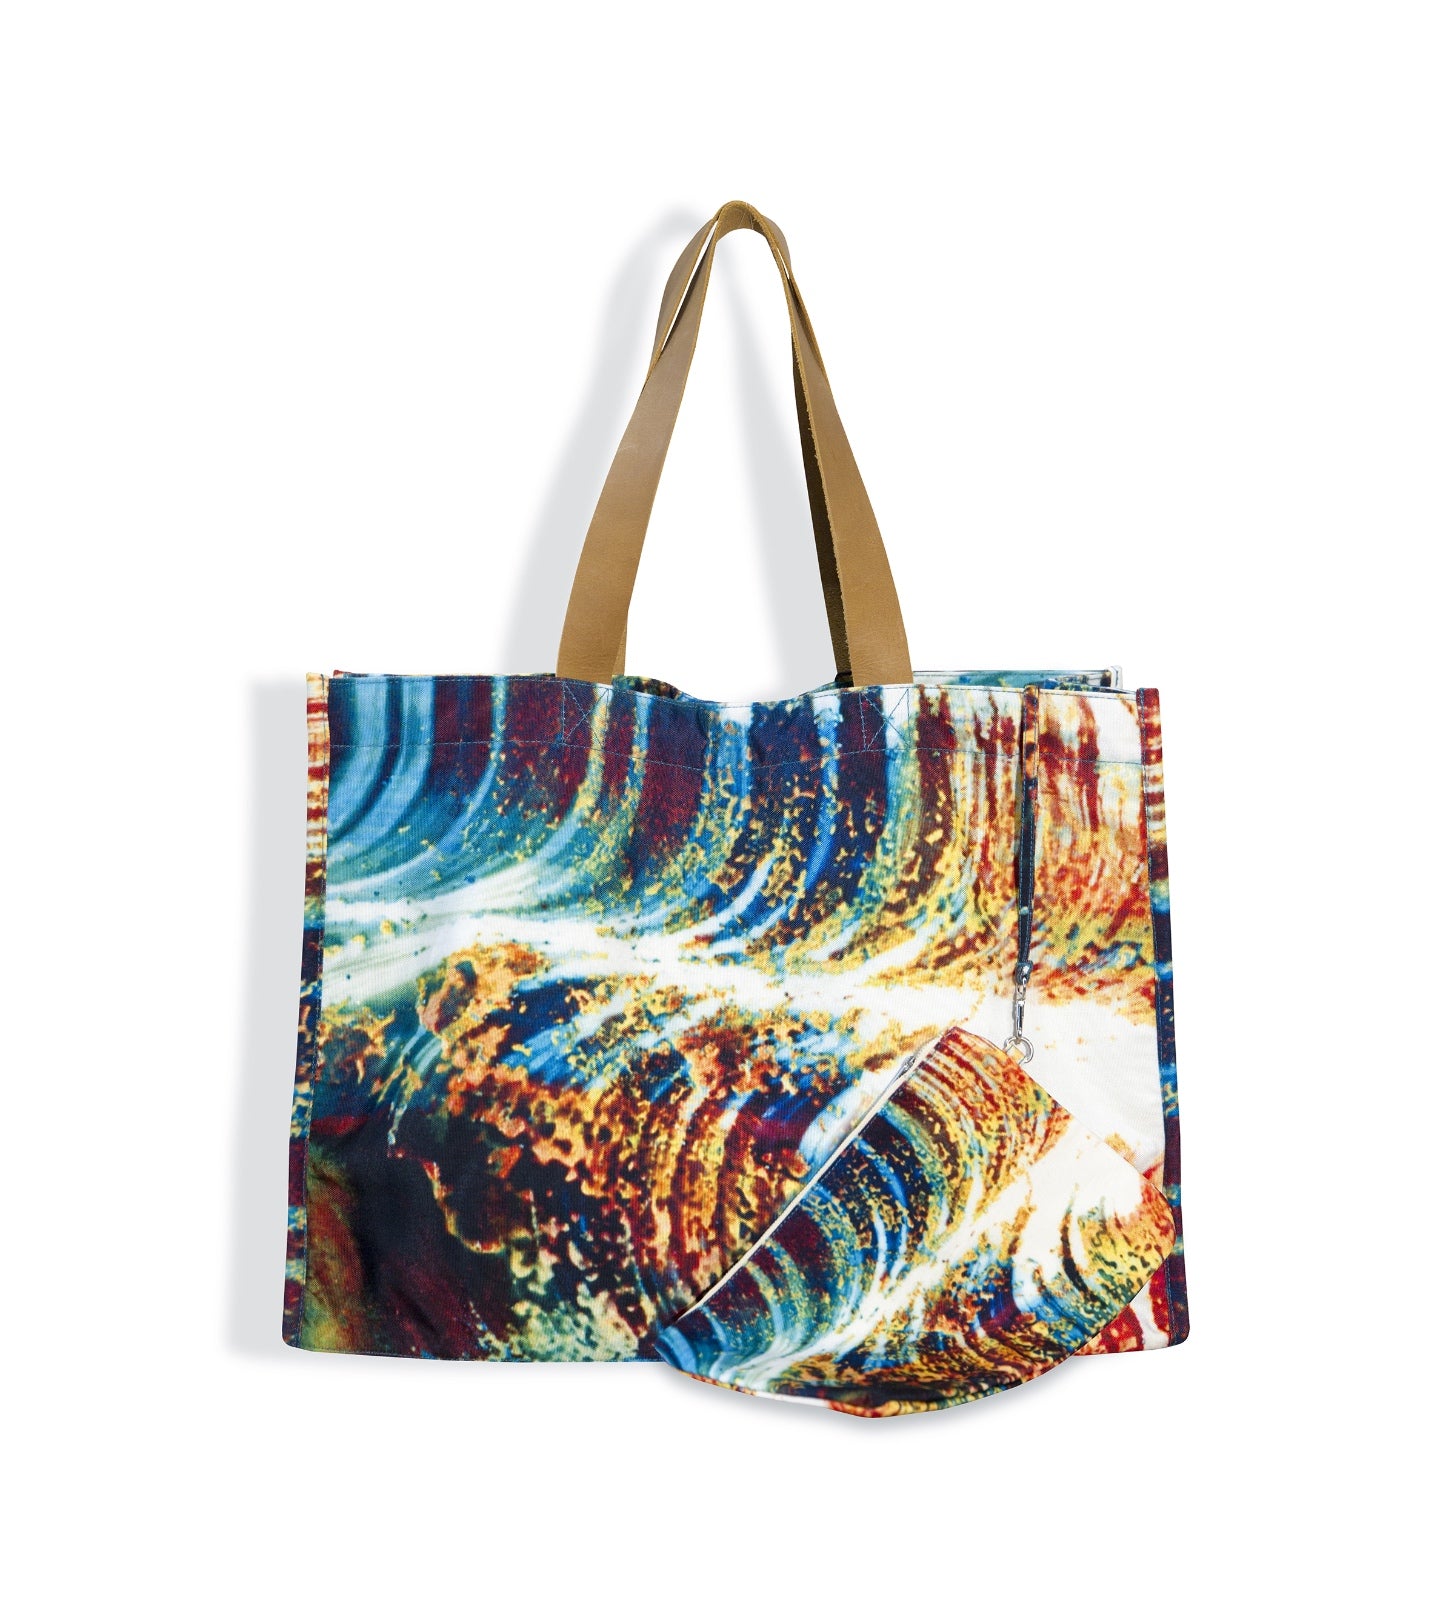 LIGHT FLOW tote and clutch